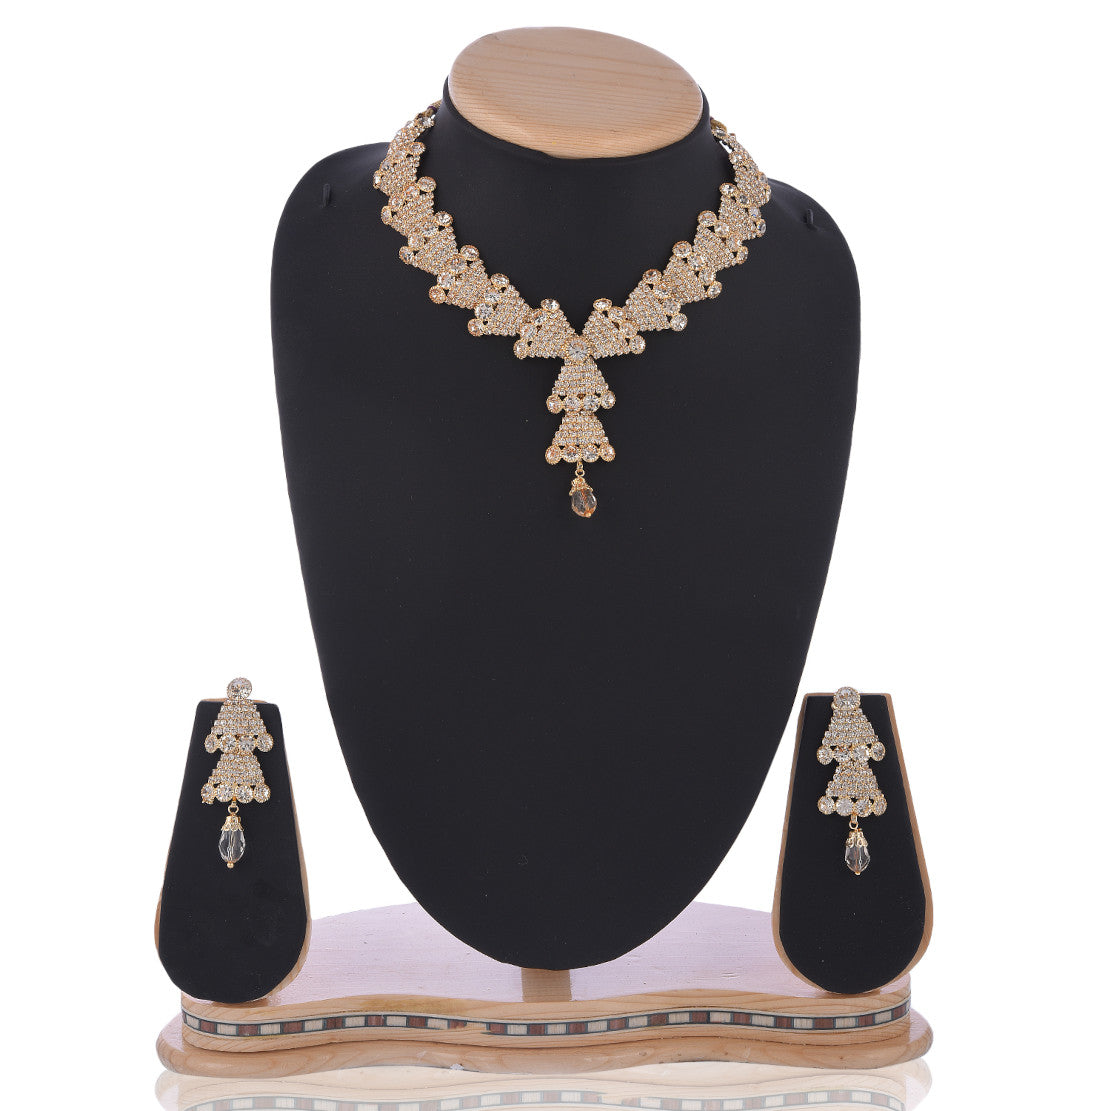 Traditional Designed by Handcrafted Necklace with Earrings for Women | Buy This Necklace Online from Mekkna